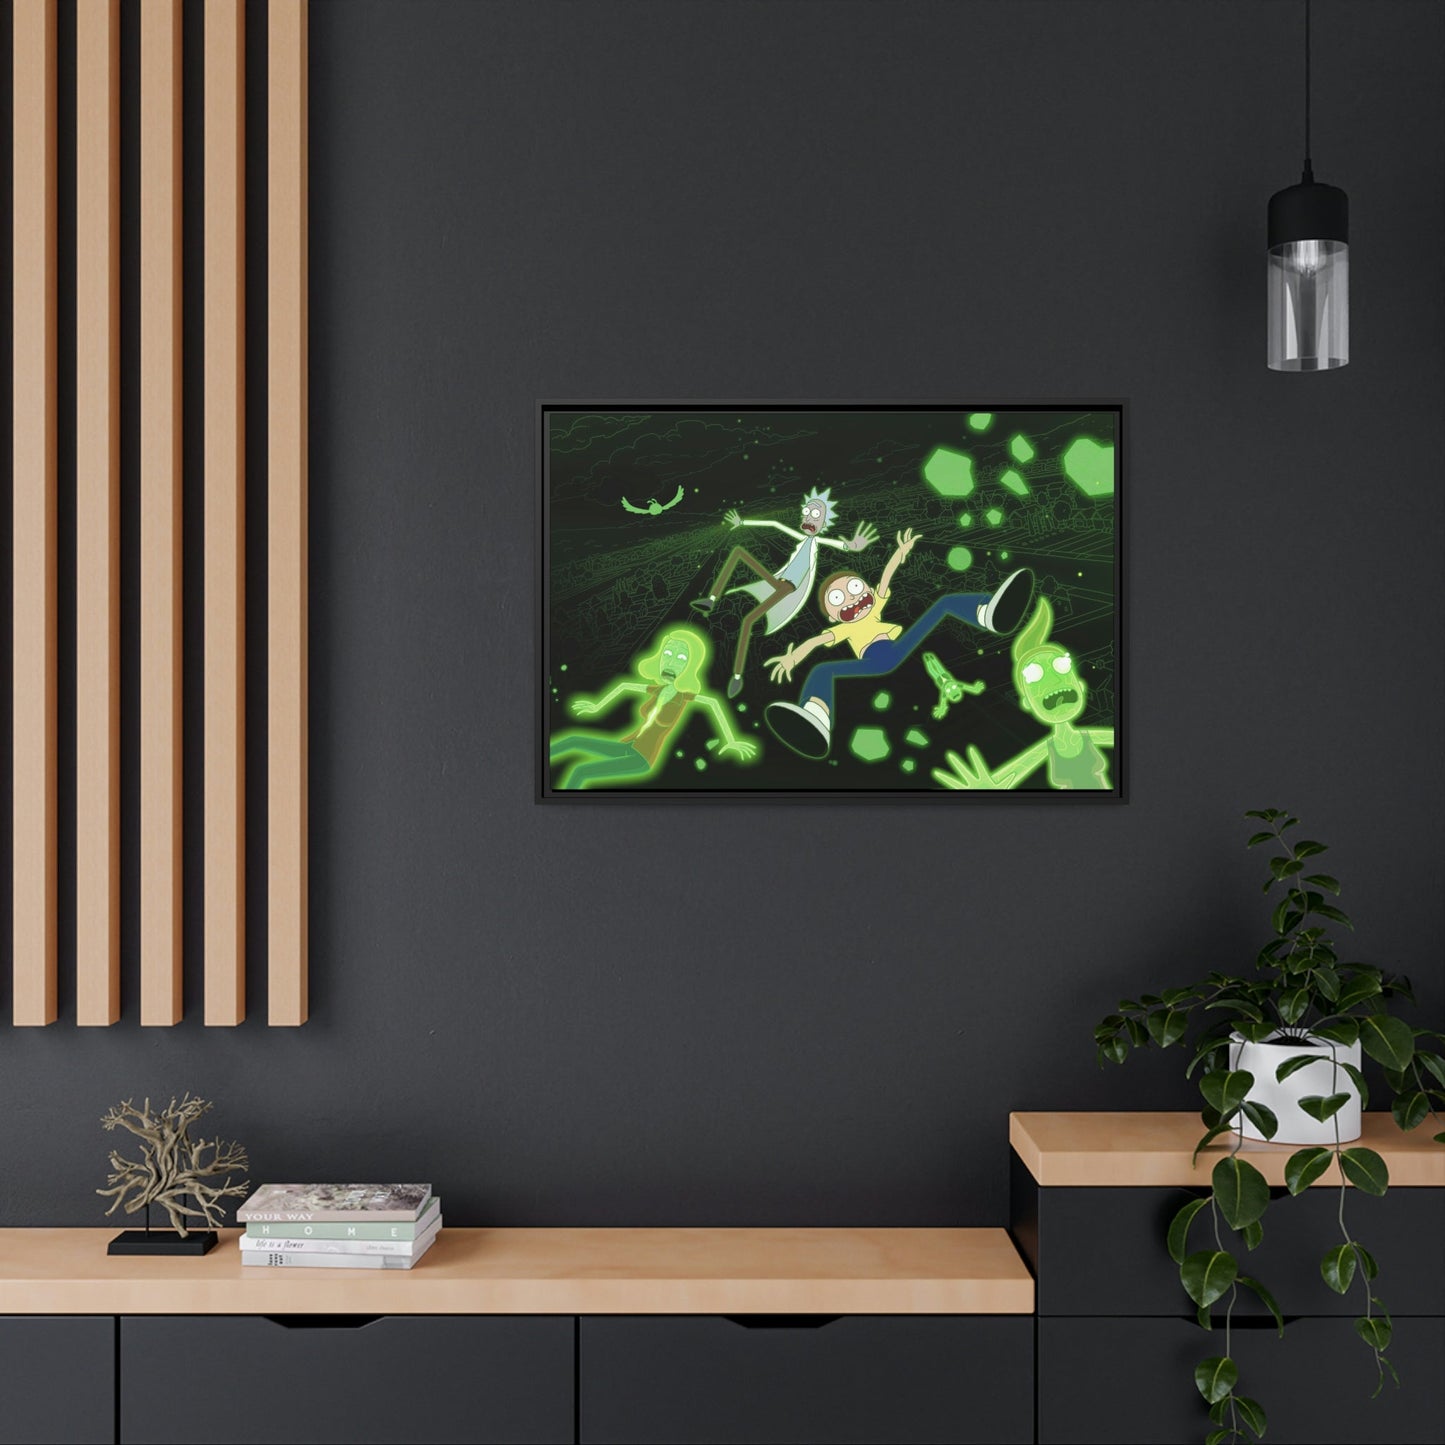 Interdimensional Adventure: Rick and Morty Art Print on Canvas for Wall Art Enthusiasts